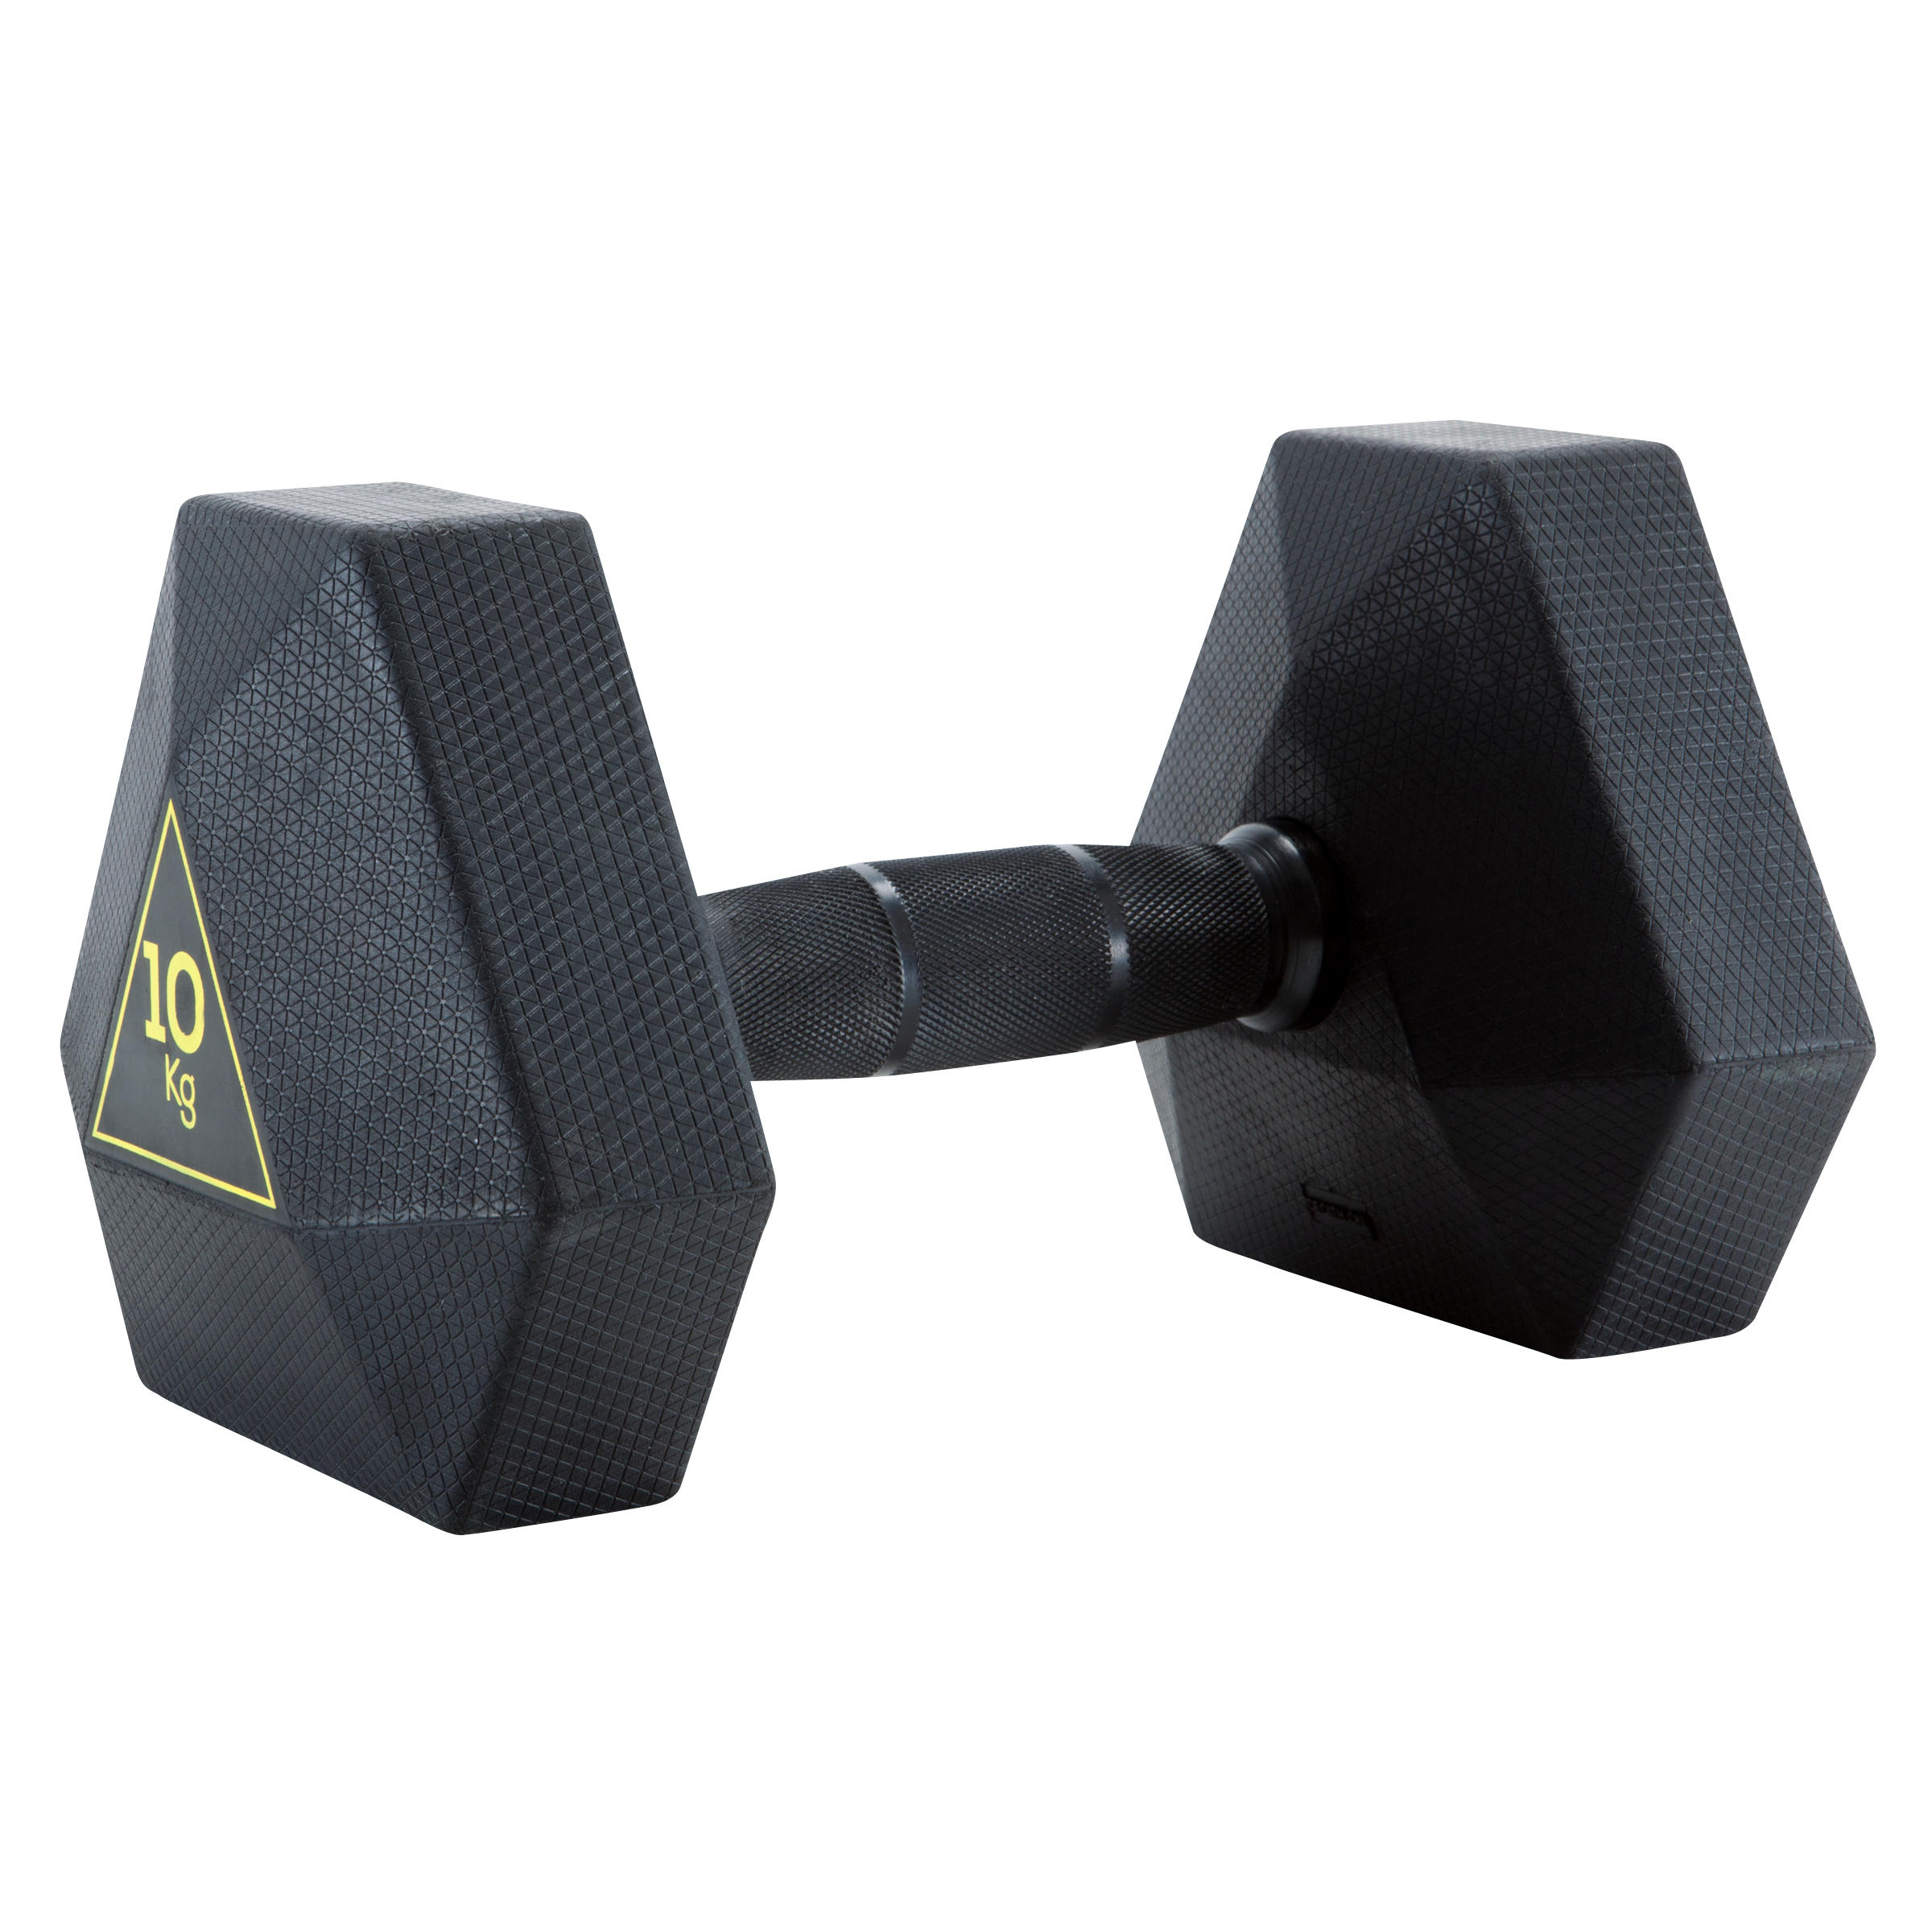 dumbbell weights online